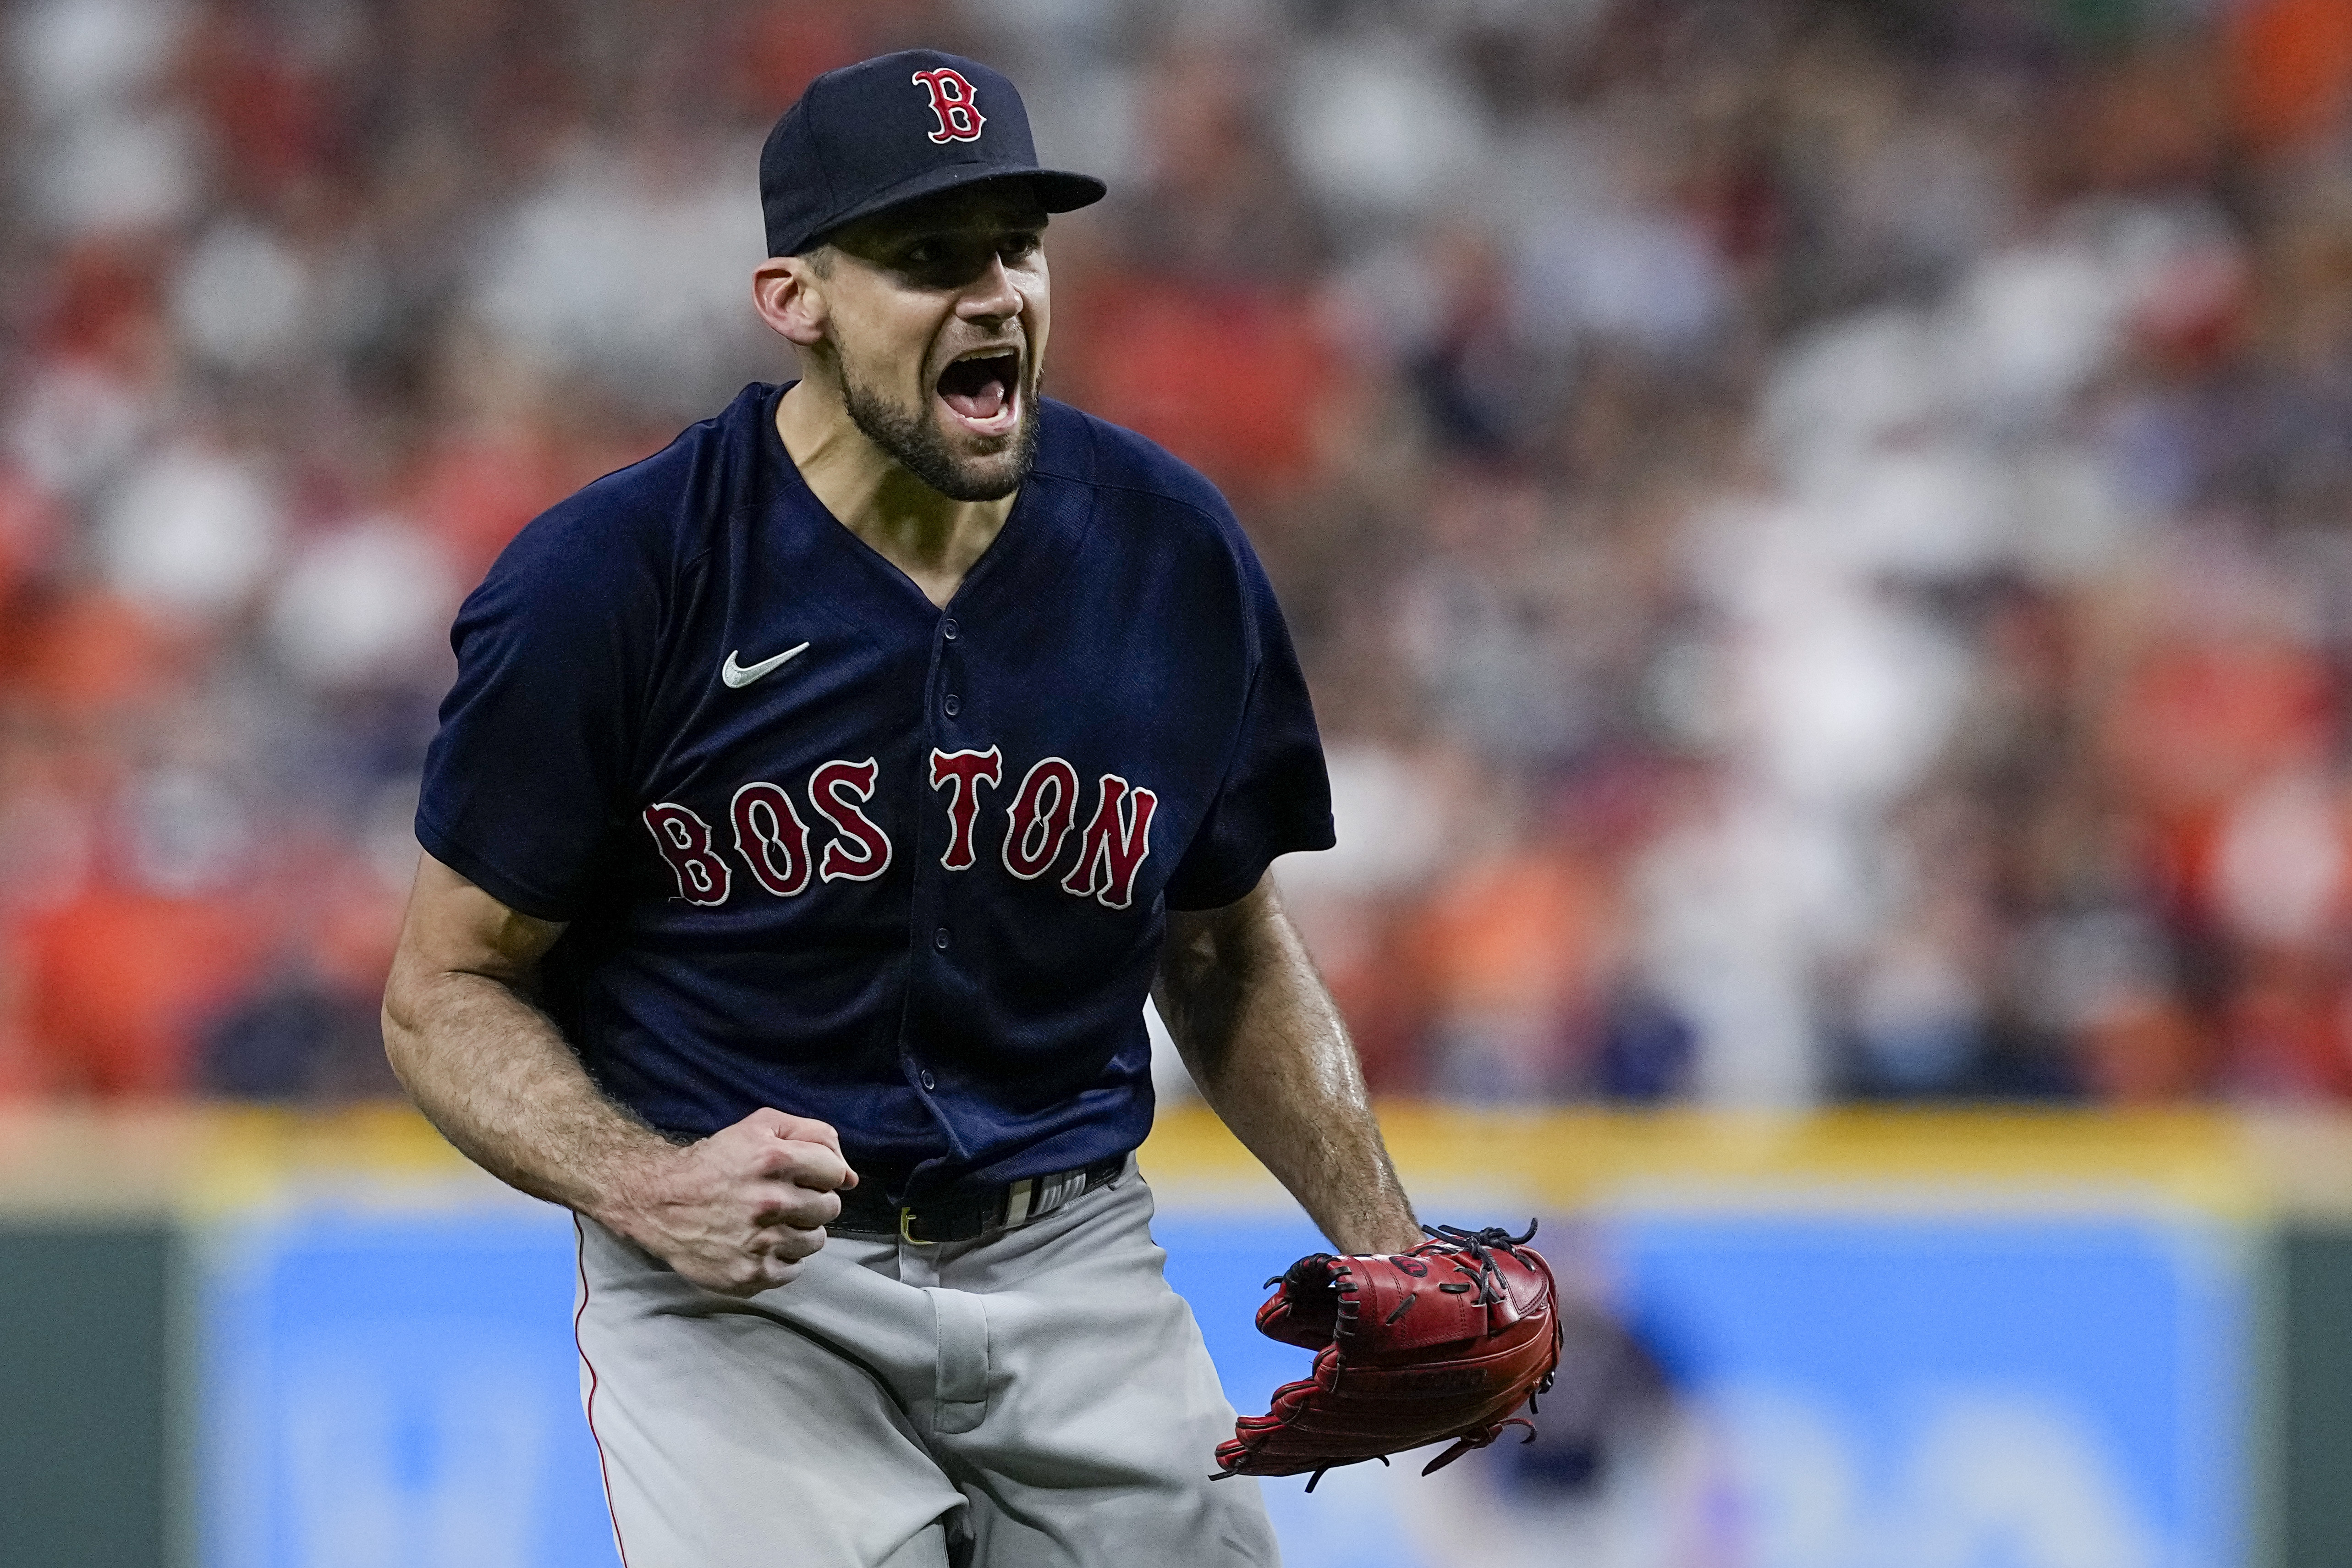 Boston Red Sox's Nathan Eovaldi finishes 4th in AL Cy Young voting